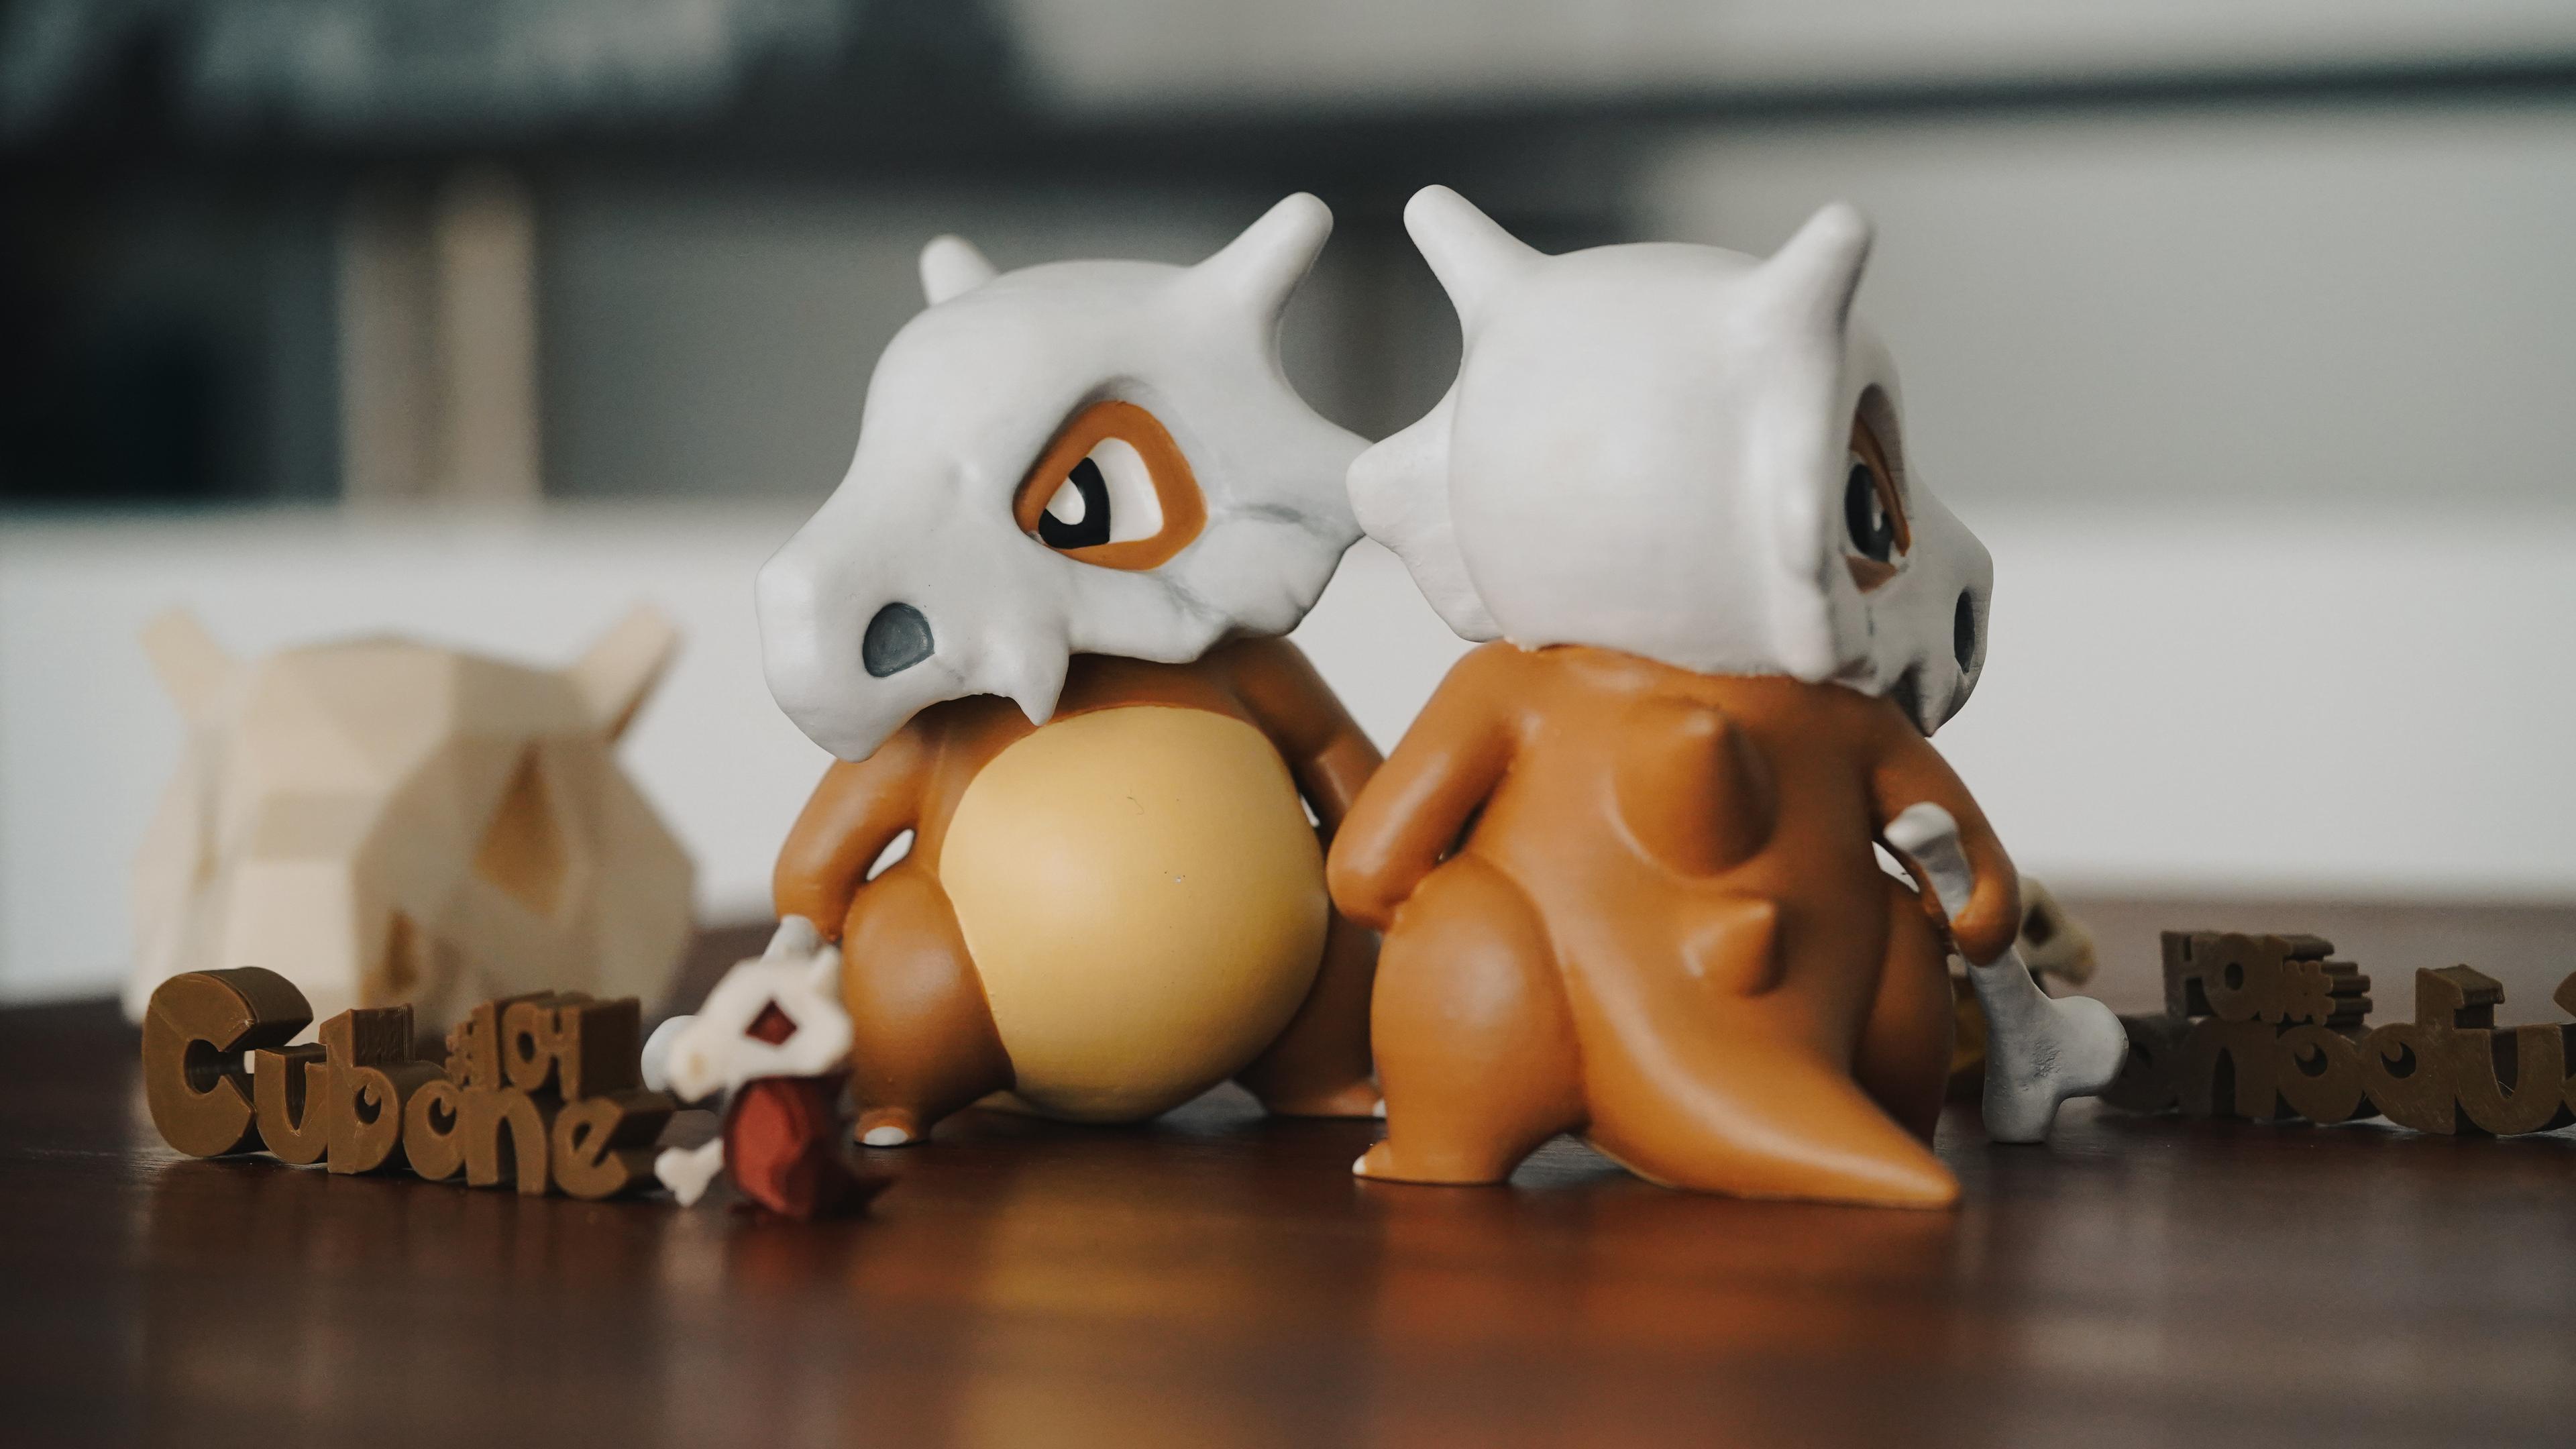 Cubone(Pokémon) - Two 12cm Cubones with their names, #number and a couple of small low poly Cubones - 3d model